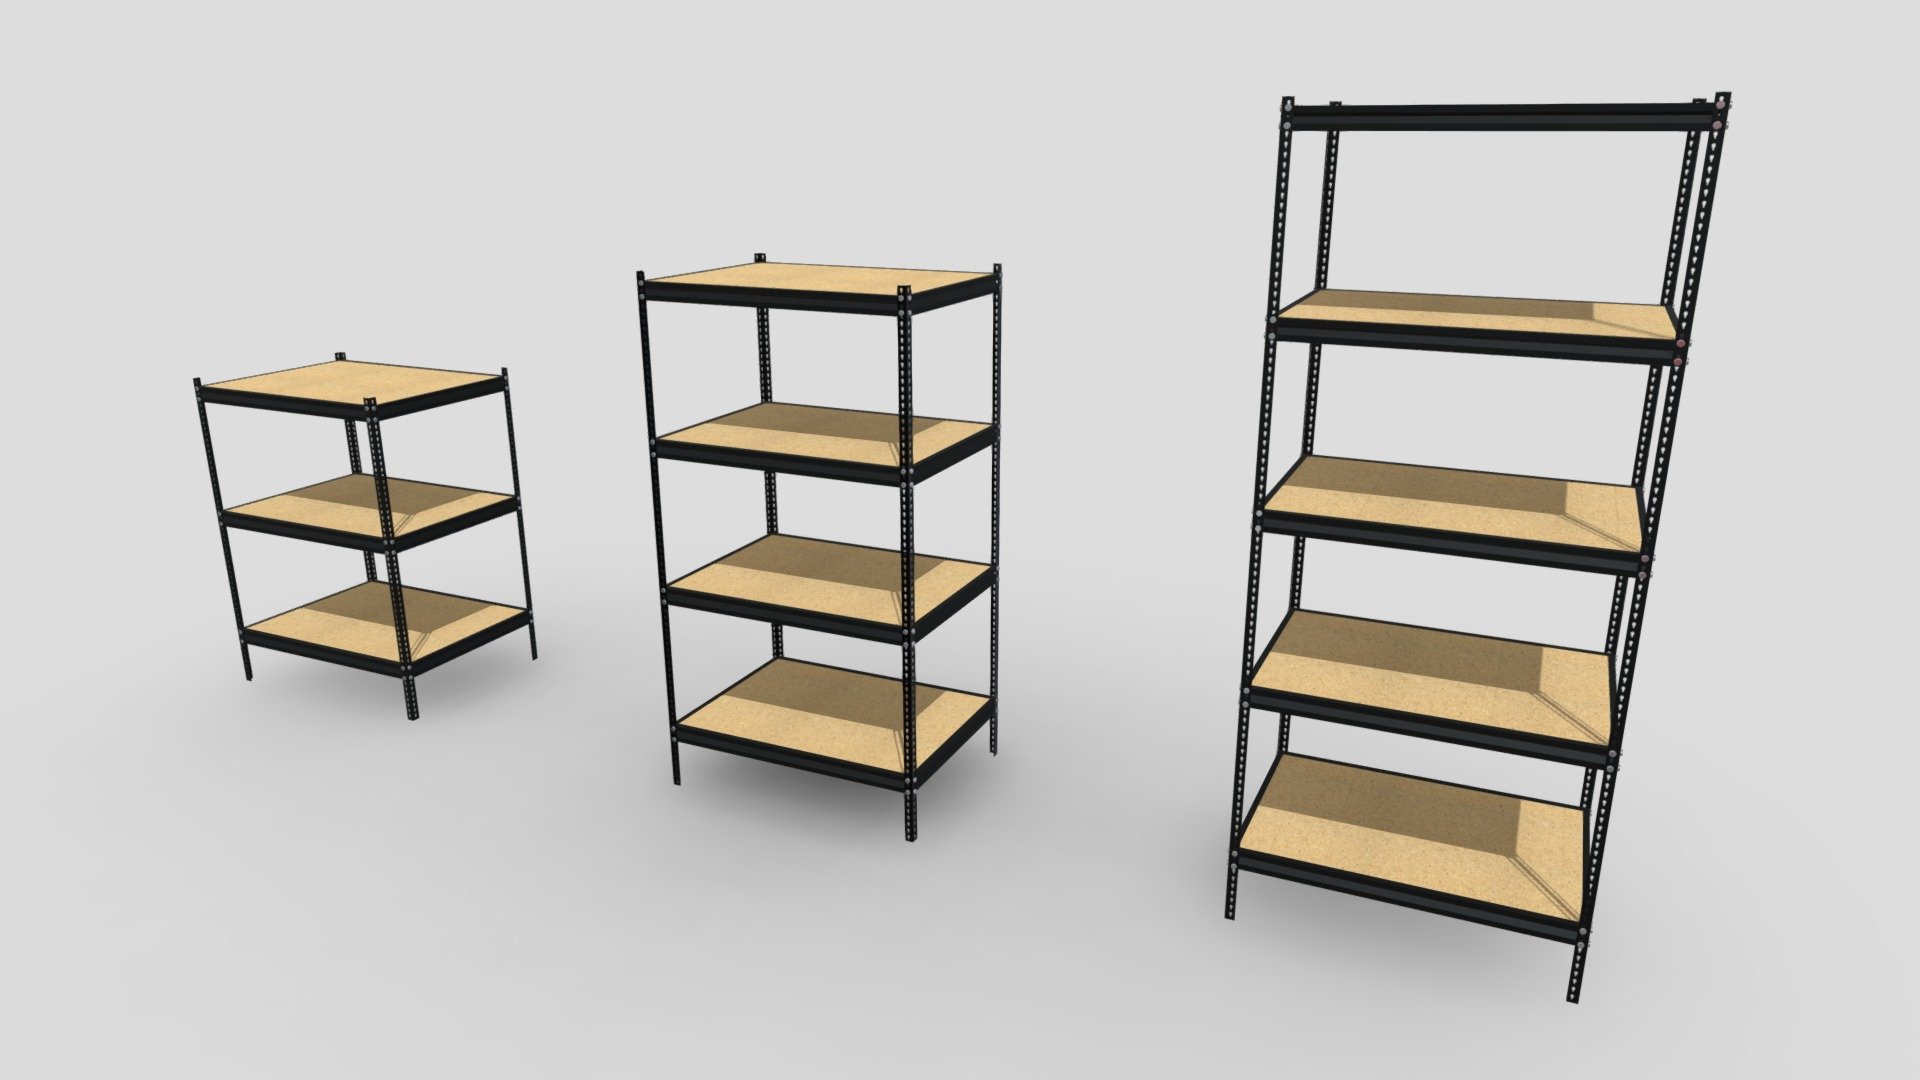 This is a collection of my heavy-duty metal shelves that were created using Blender. It comes with three shelves with different heights.

Features:


Each model uses metalness workflow and is PBR ready
Includes PBR 4K textures in PNG format
Includes UVLayout textures to show how each model has been unwrapped
Each model uses diffuse texture with an alpha channel
Overlapping UVs used for mirrored/duplicate objects to save texture space
All textures are editable and customizable
Each object has been manually unwrapped with matching PBR textures
Native blend file is included with pre-applied textures
Each model has been exported in 4 file formats (FBX, OBJ, GLTF, DAE/Collada)

Included Texture Types:


AO, Diffuse, Diffuse(Alpha), Roughness, Gloss, Metallic
UVLayout

The source file is uploaded in FBX format and is used for demonstration. In the additional file you will find all model exports and the textures that go along with them 3d model